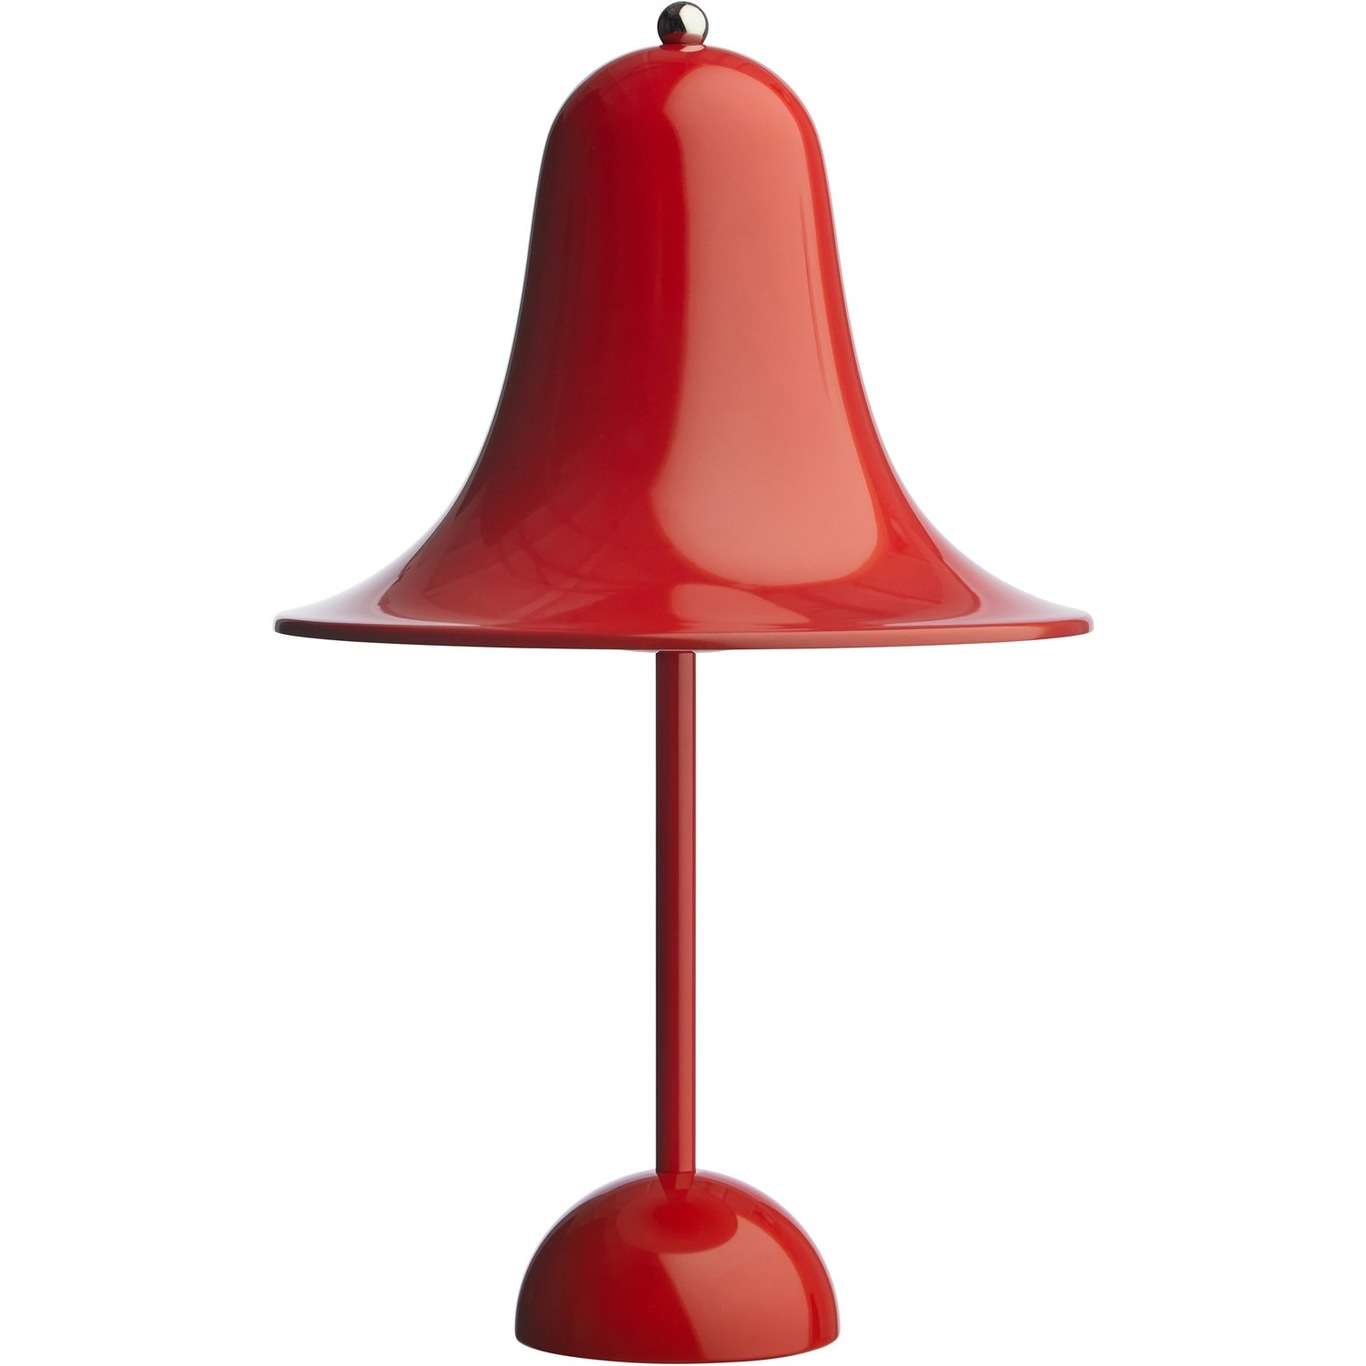 Pantop Table Lamp 23 cm, Bright Red